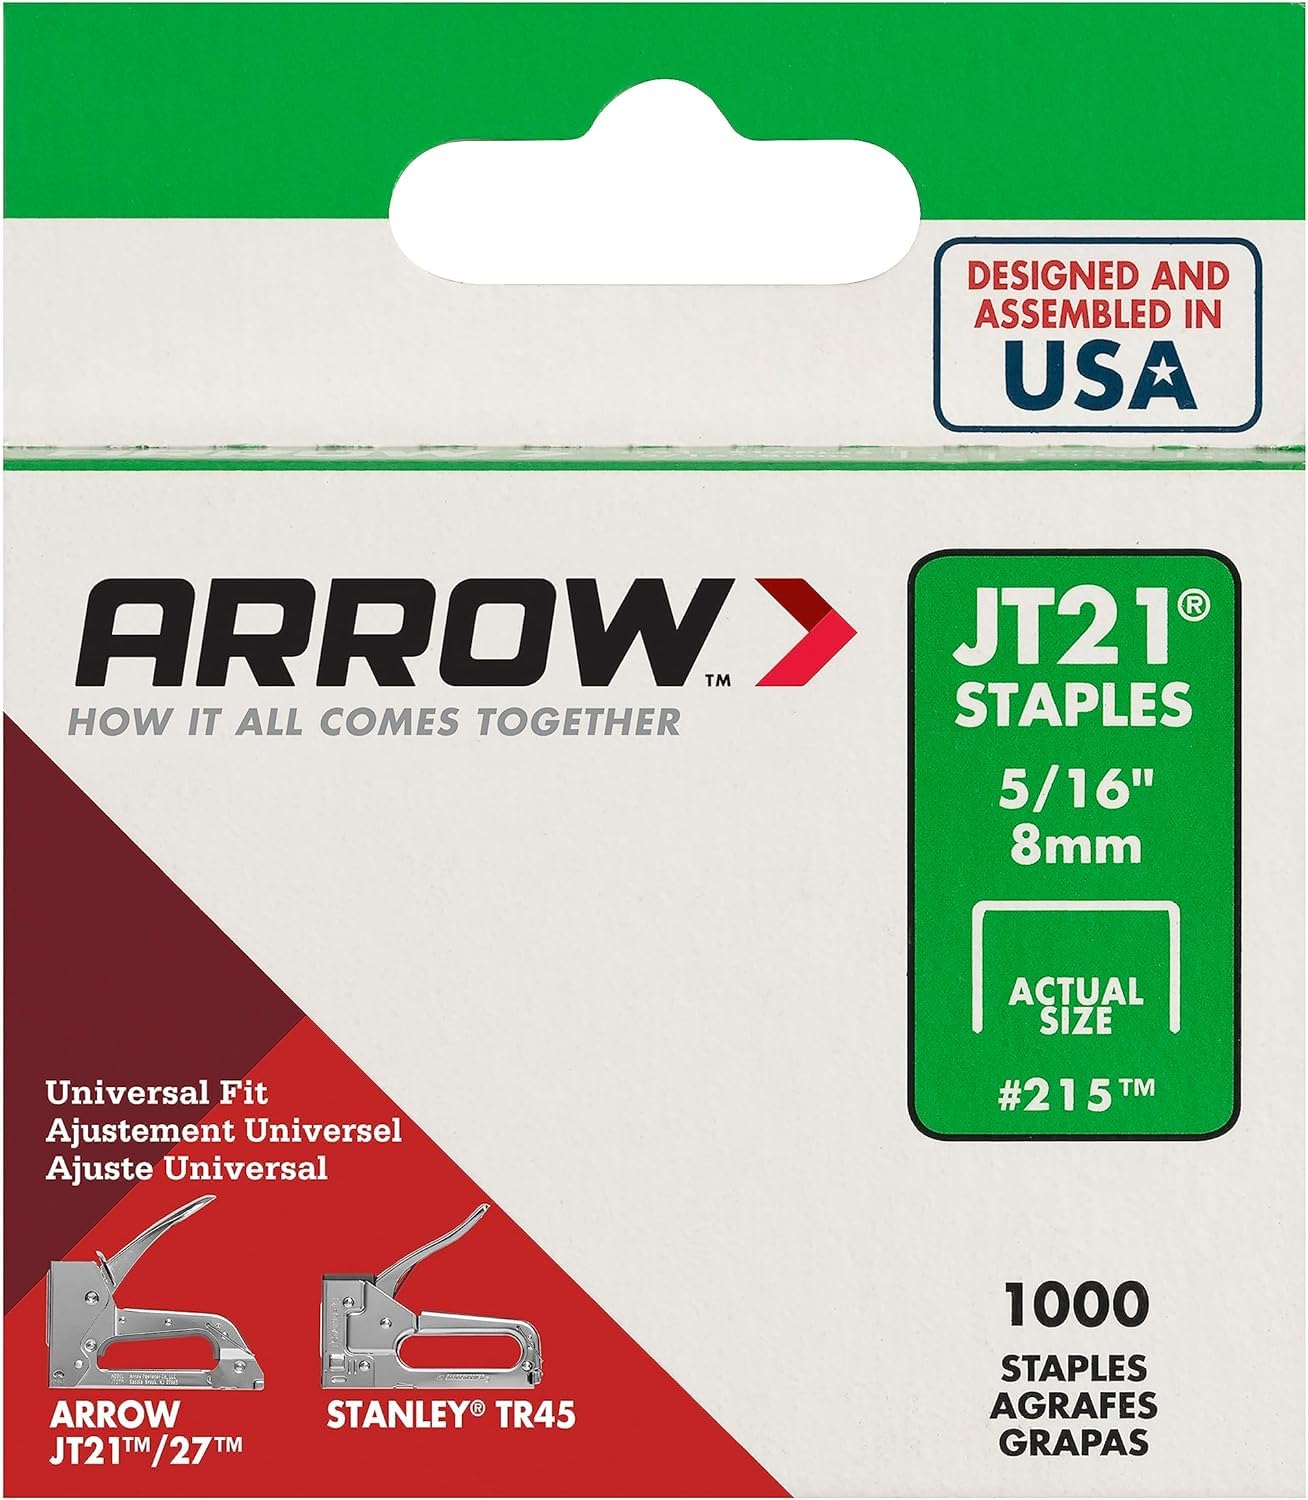 Arrow 215 JT21 Thin Wire Staples for Staple Guns and Staplers, Use for Upholstery, Crafts, General Repairs, 5/16-Inch Leg Length, 7/16-Inch Crown Width, 1000-Pack